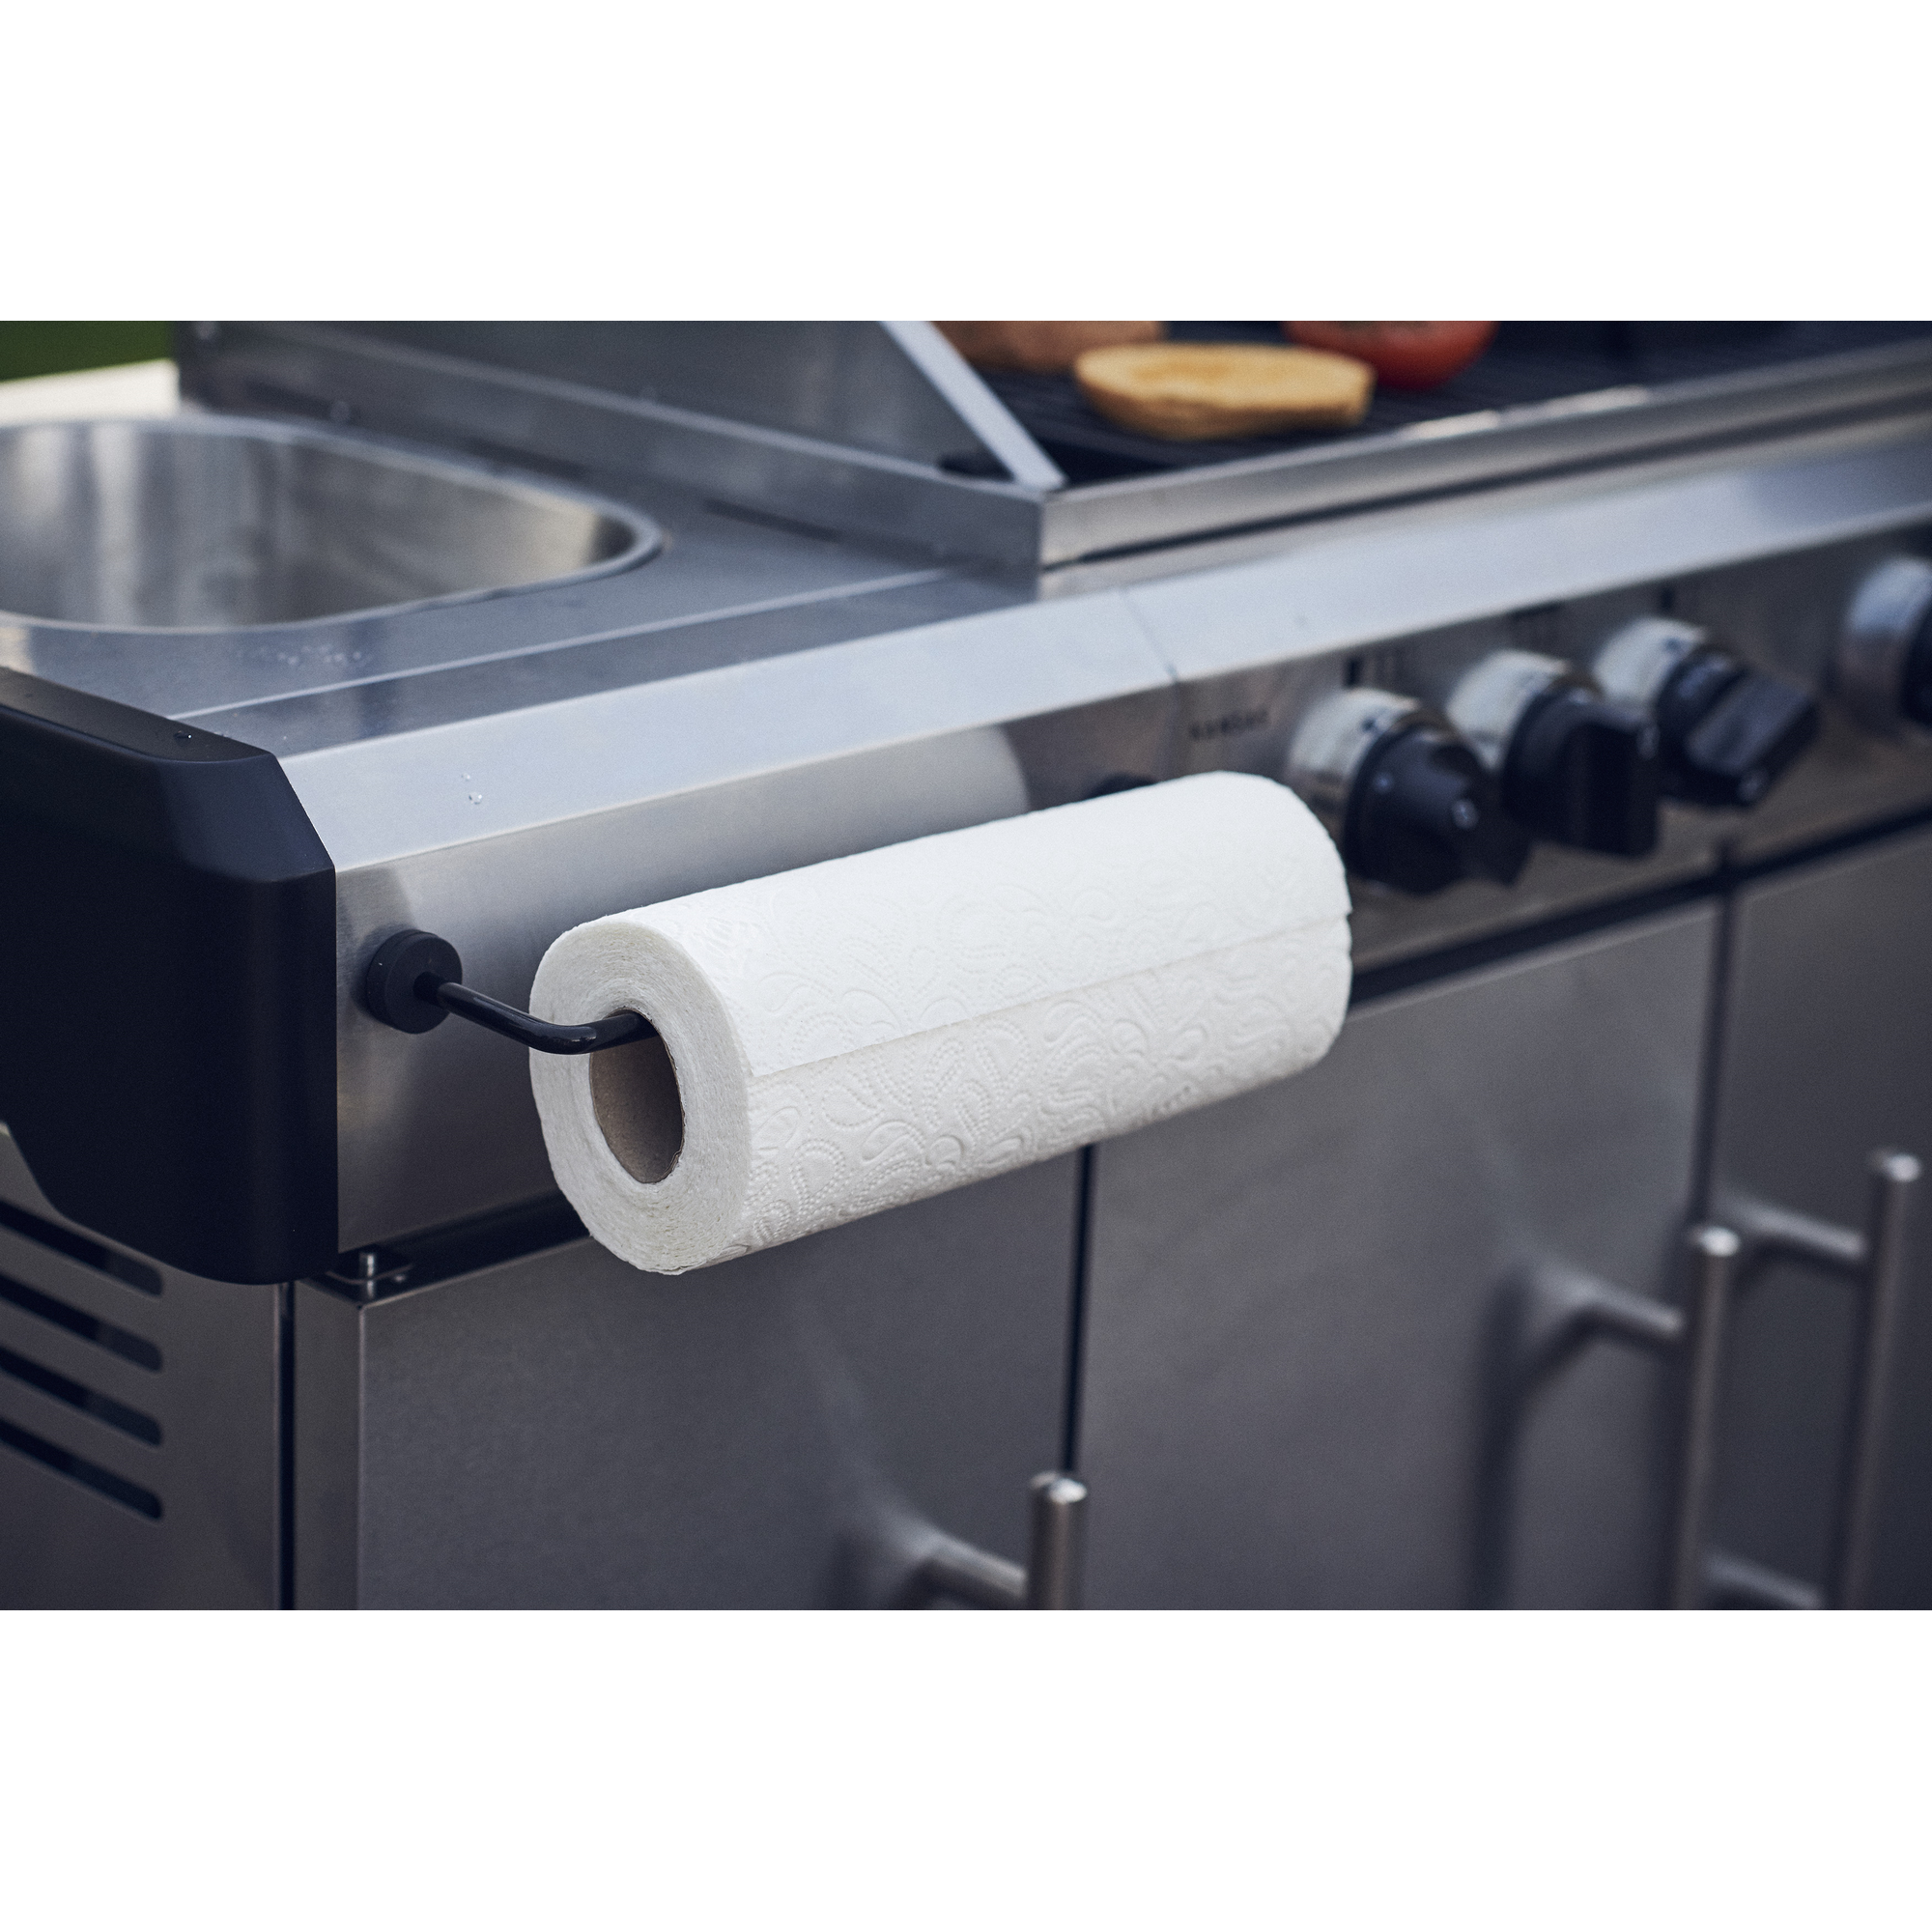 Küchenrollenhalter 'Grill Mags' mit Magnethalterung + product picture